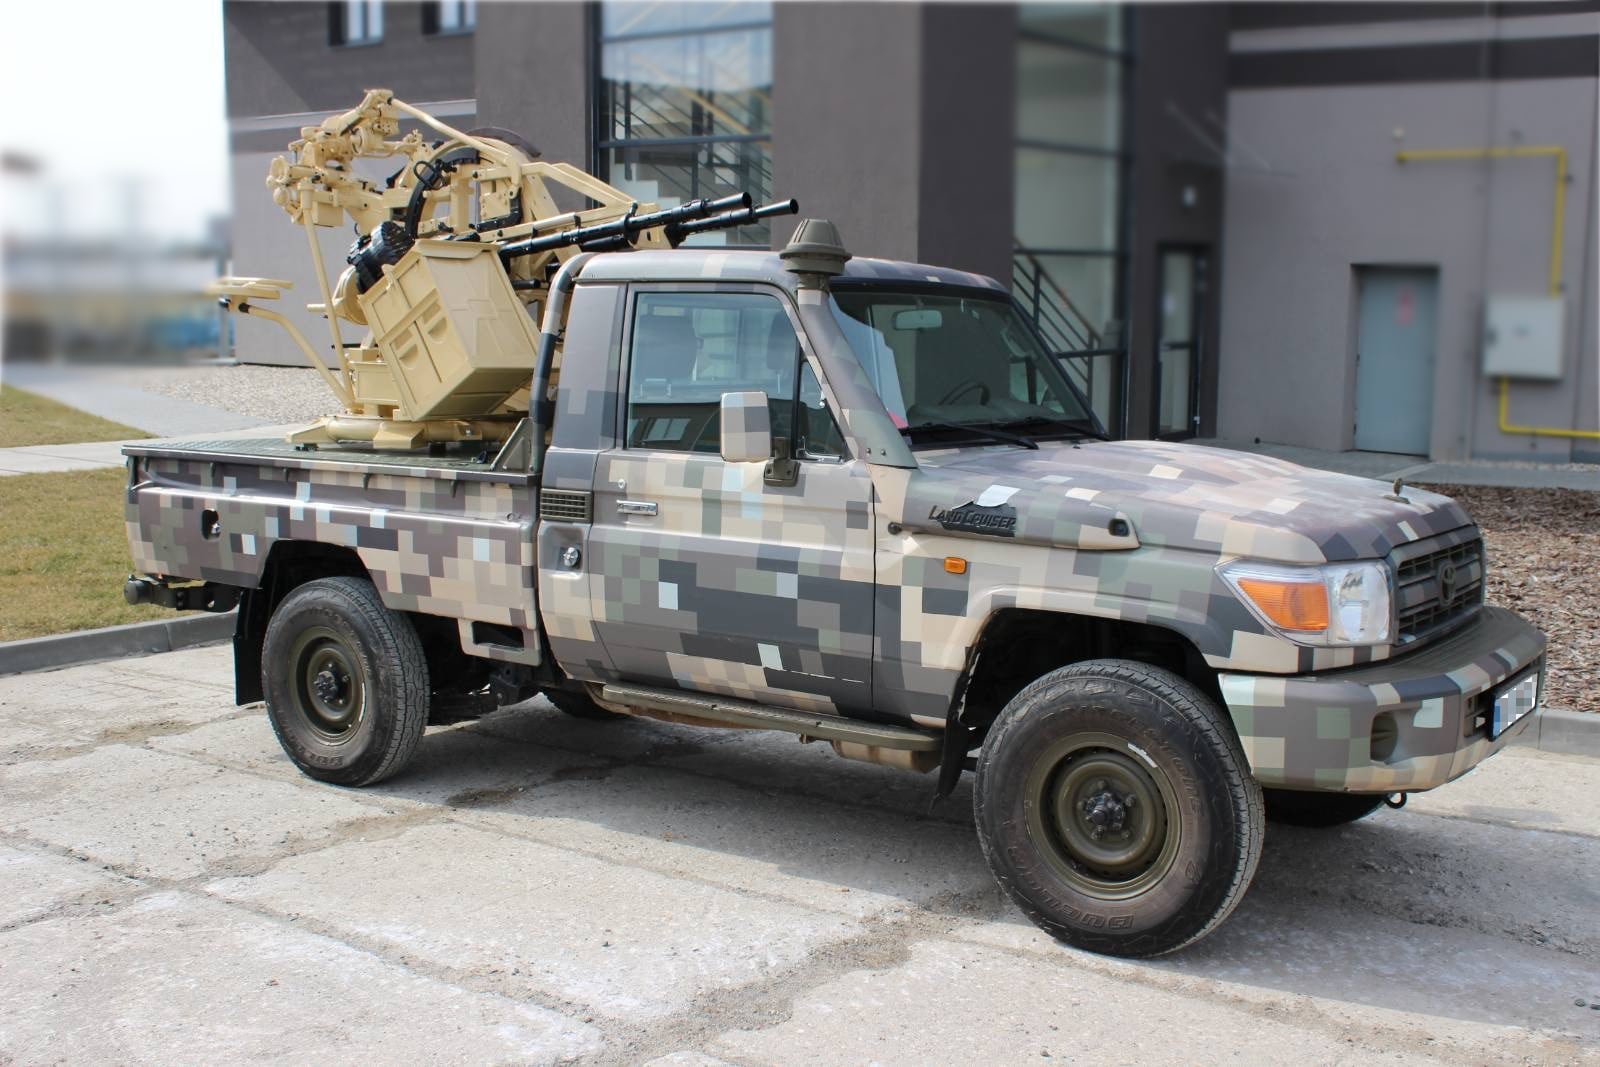 Czechs raise $3,850,000 for Viktor for AFU: an anti-aircraft system based on Toyota Land Cruiser to counter Iranian Shahed-136 UAVs